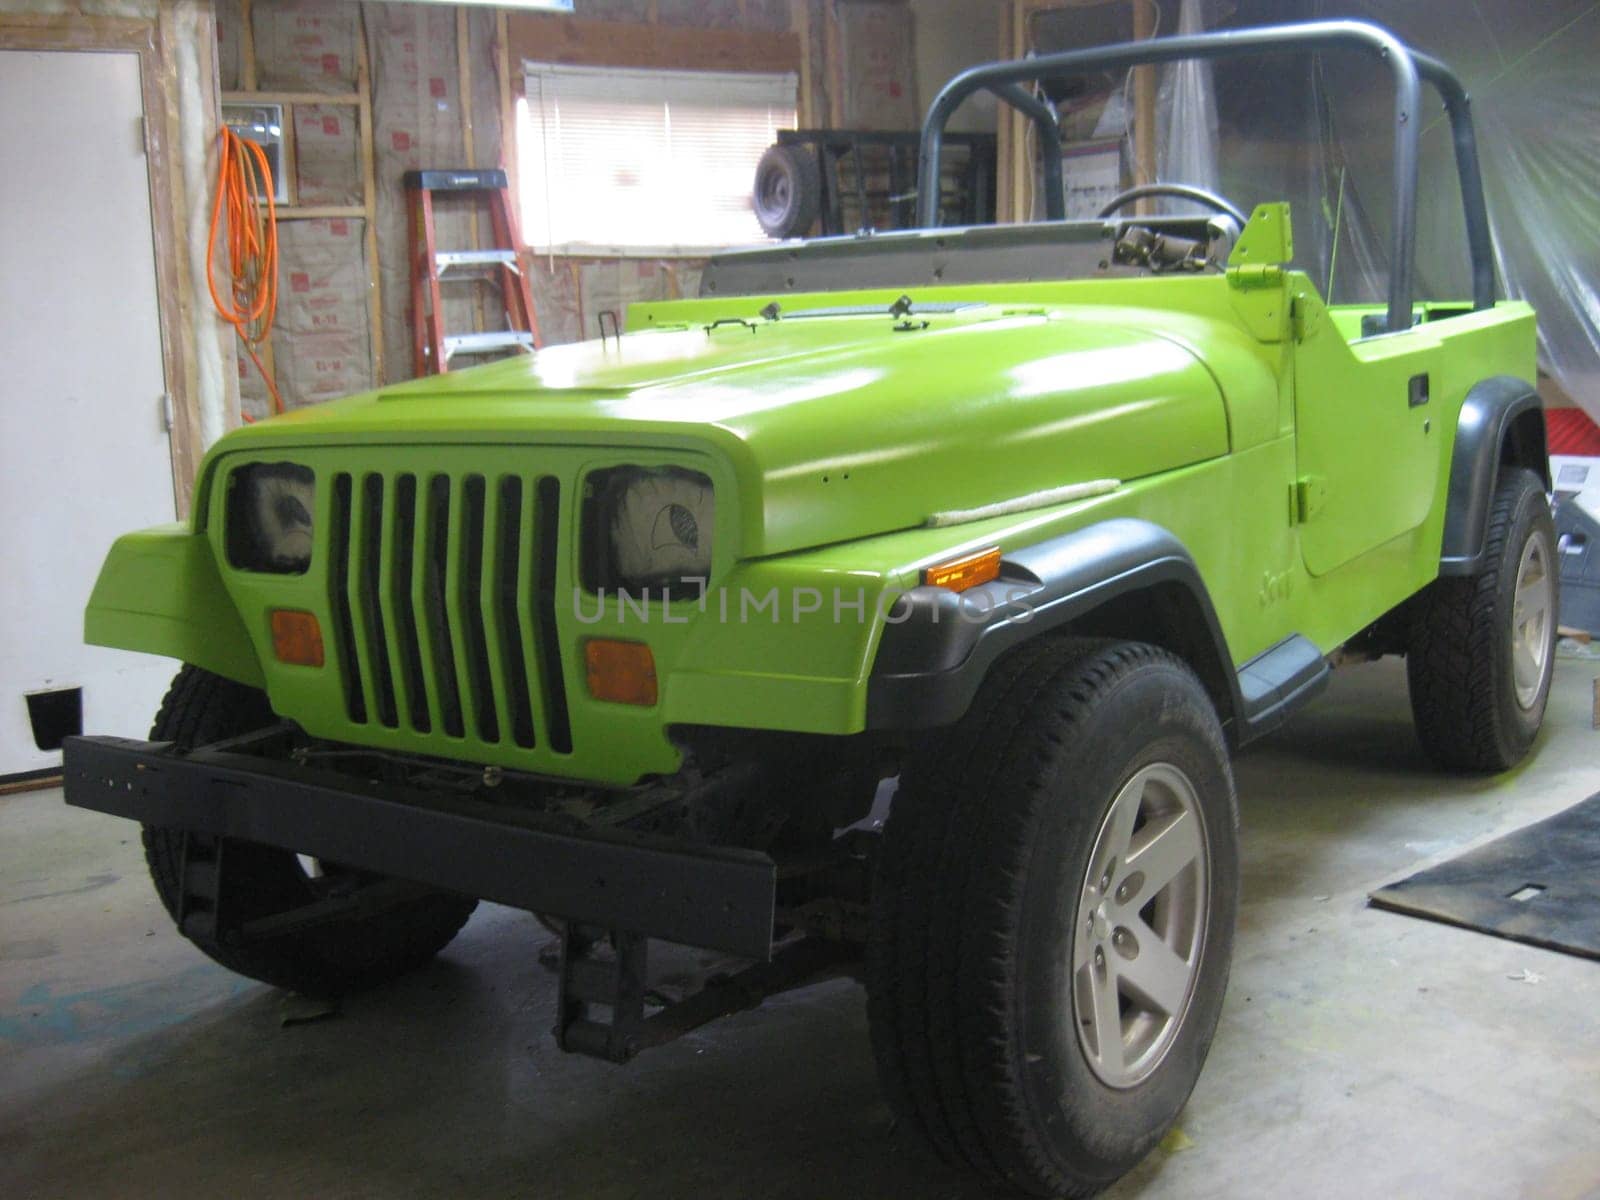 Vehicle with Eyes for Headlights, Lime Green Paint Job, 1990s Vehicle . High quality photo